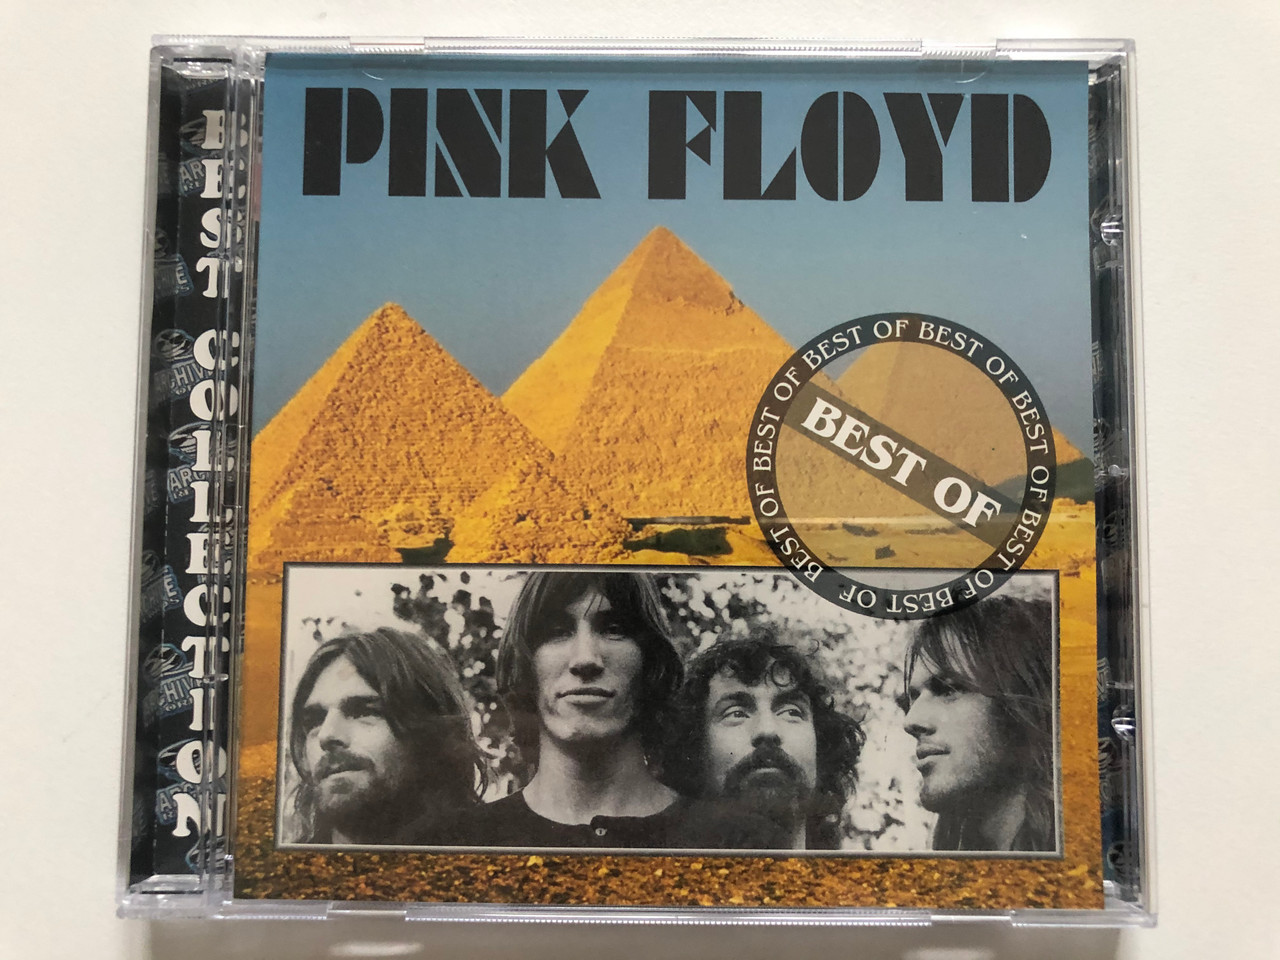 https://cdn10.bigcommerce.com/s-62bdpkt7pb/products/30332/images/179584/Pink_Floyd_Best_Of_Pink_Floyd_Archive_Records_Audio_CD_ARCD_9712_1__91471.1622187636.1280.1280.JPG?c=2&_ga=2.147550007.124754382.1622221975-1131994027.1622221975